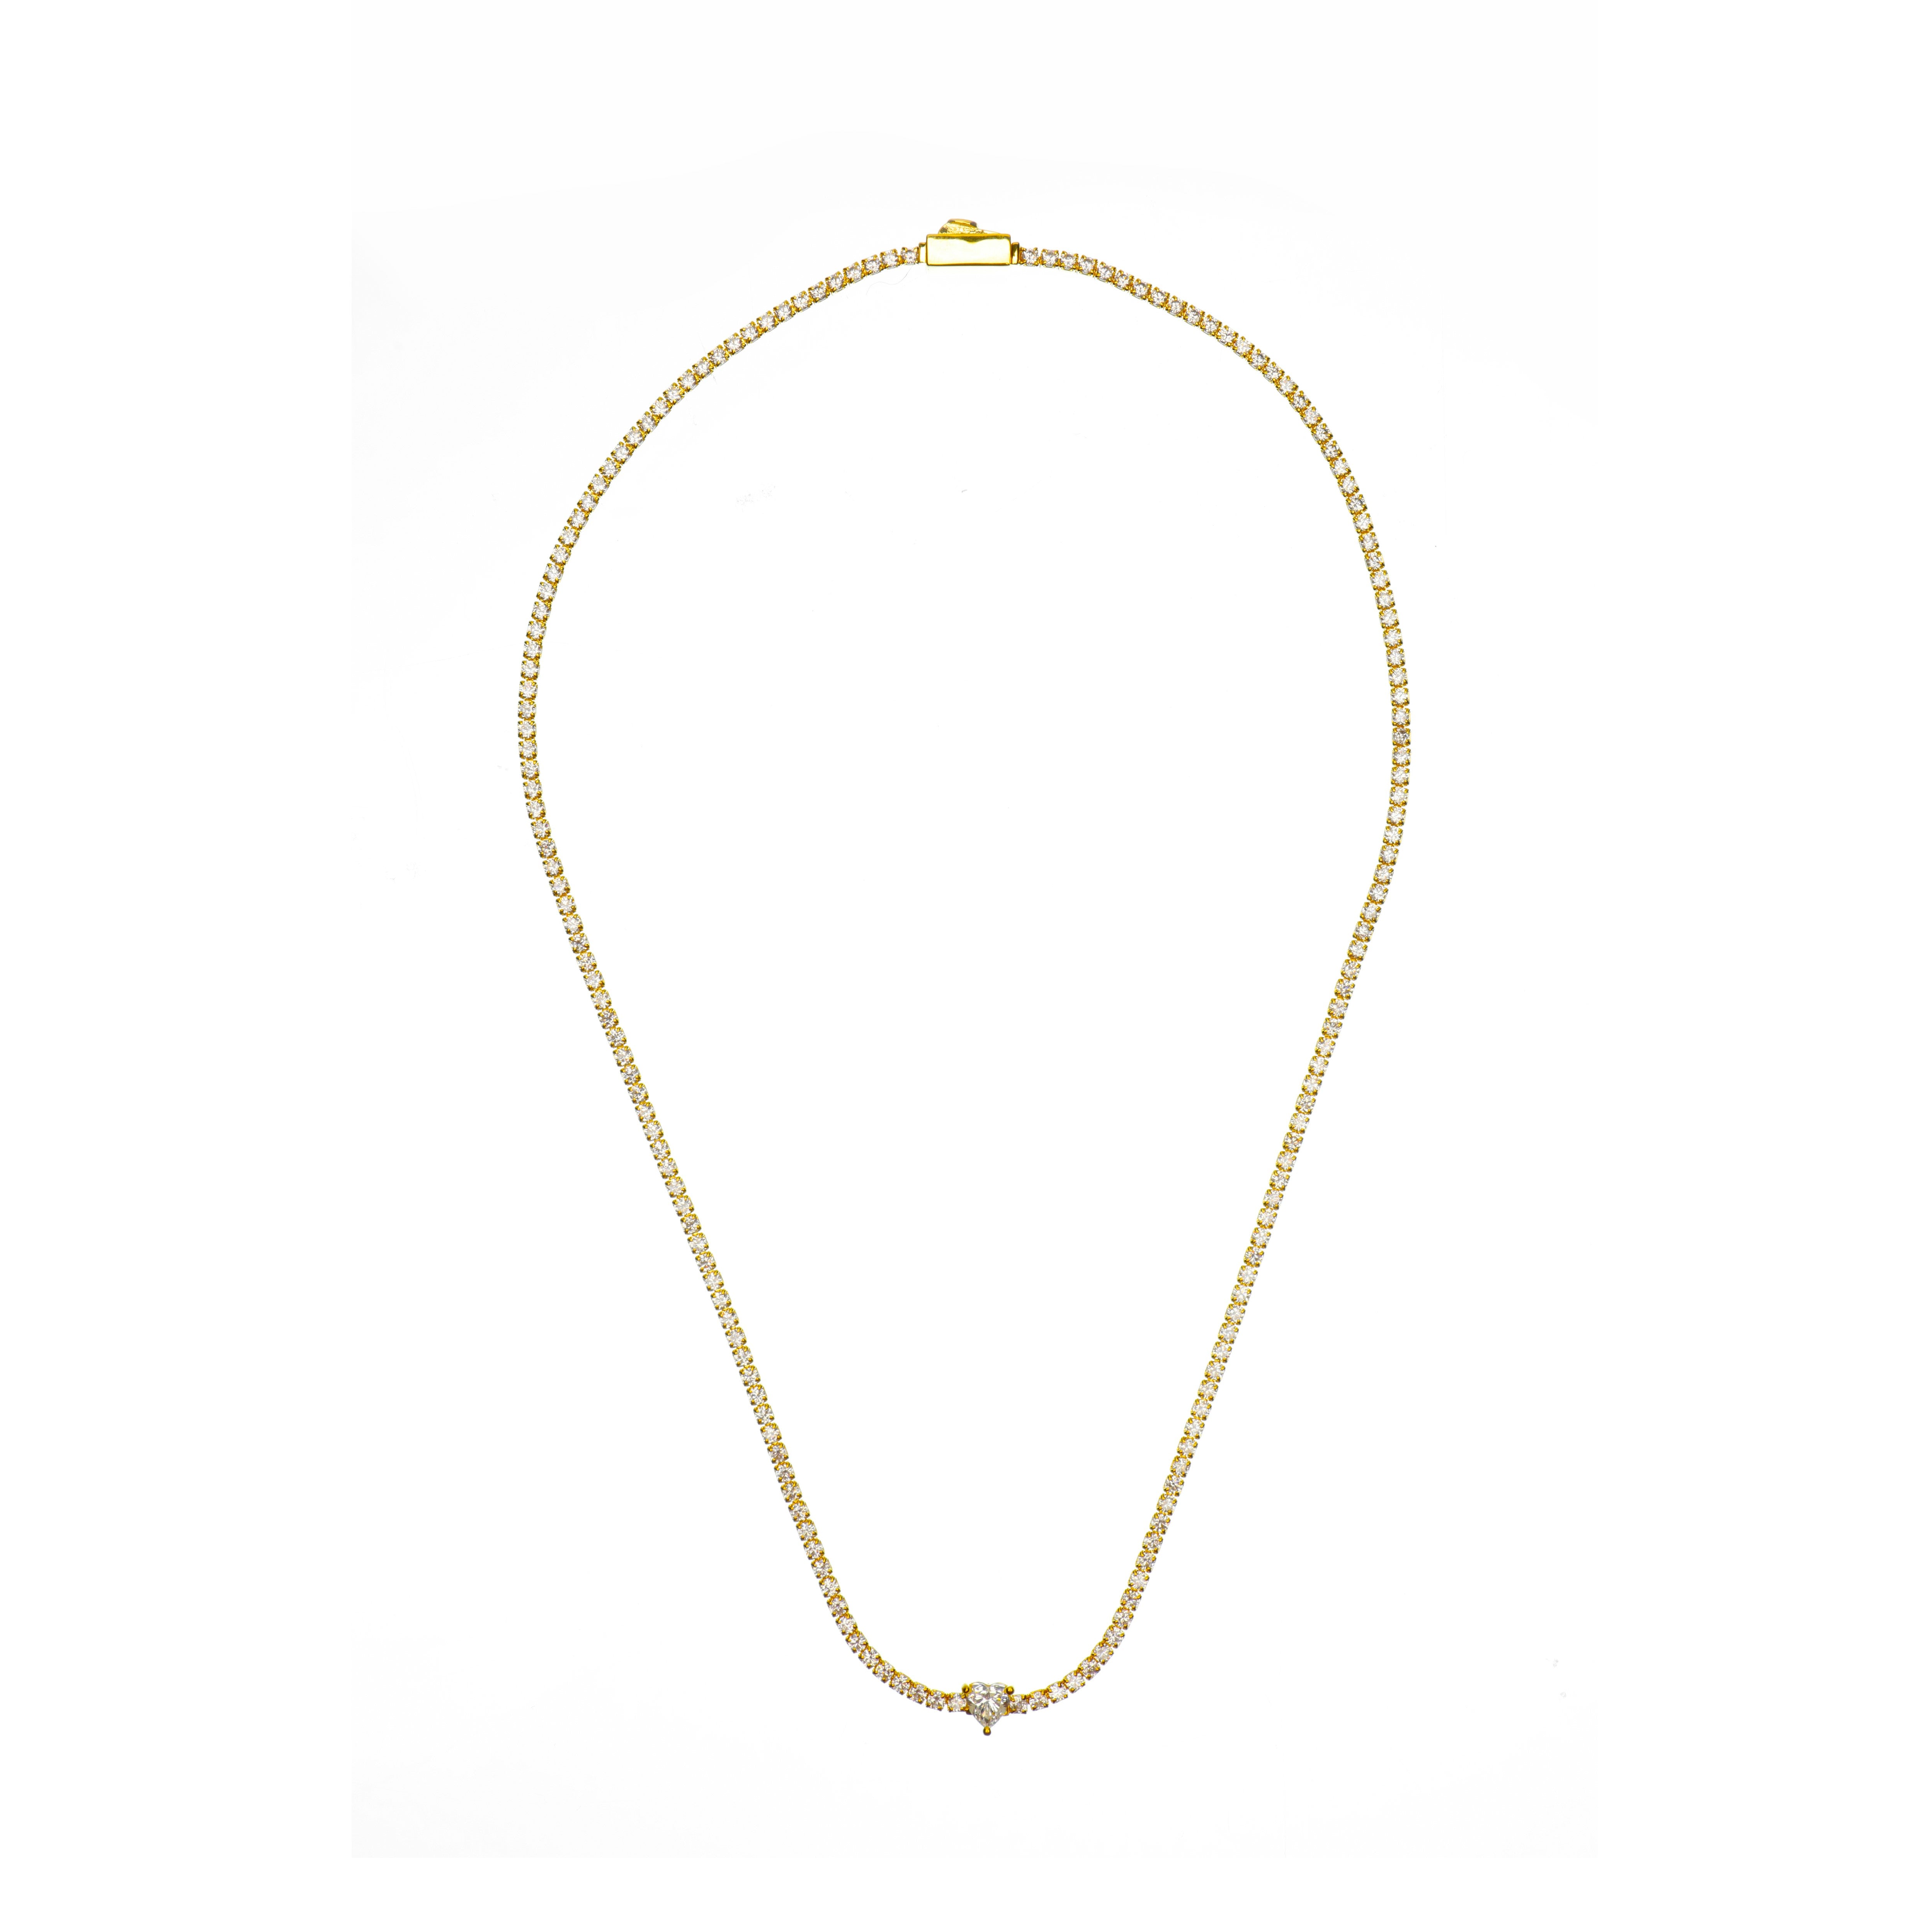 SWEETHEART TENNIS NECKLACE GOLD 42CM